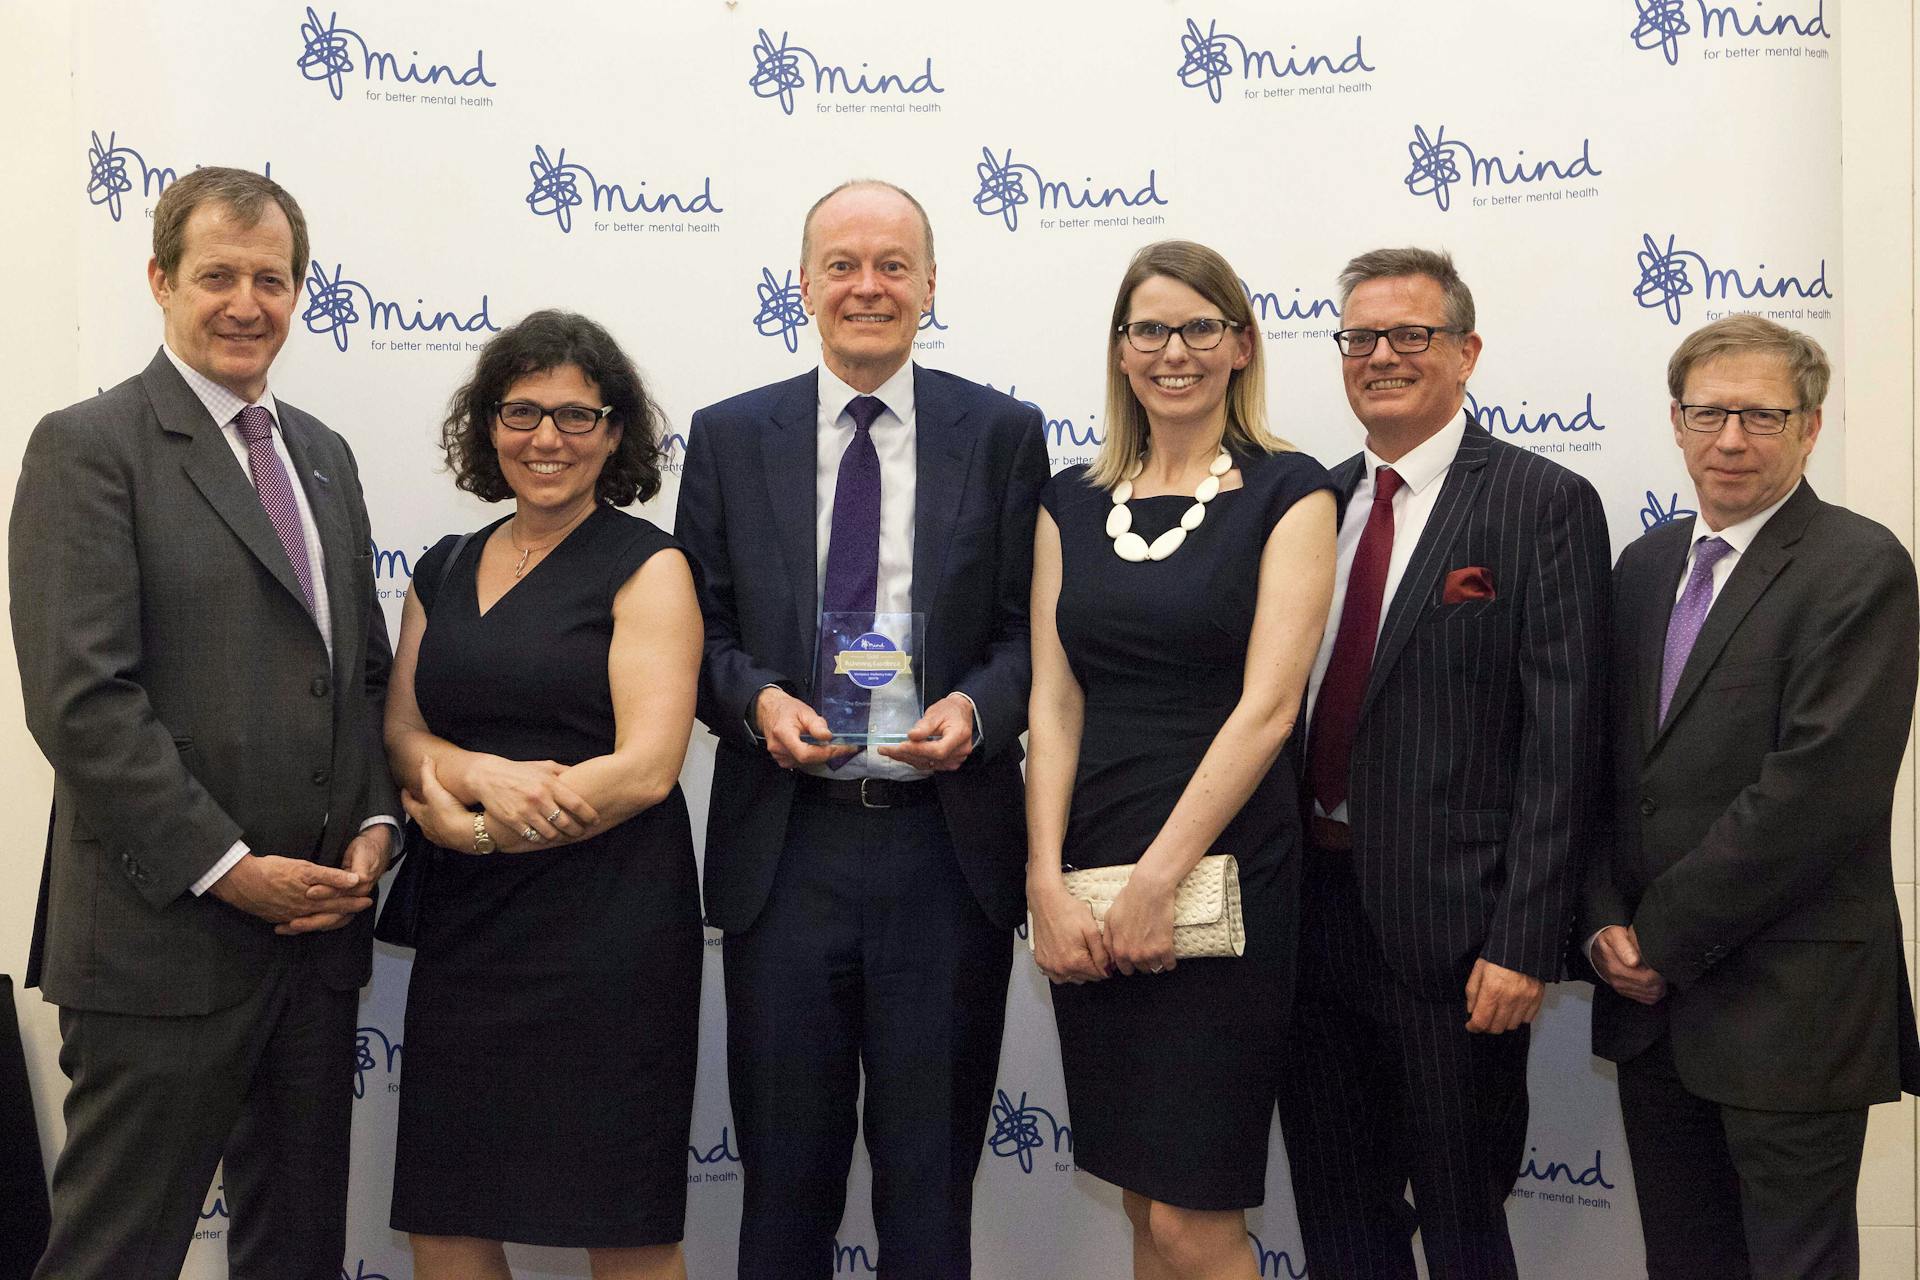 Environment Agency Scoops Award For Workplace Wellbeing From Mental Health Charity Mind